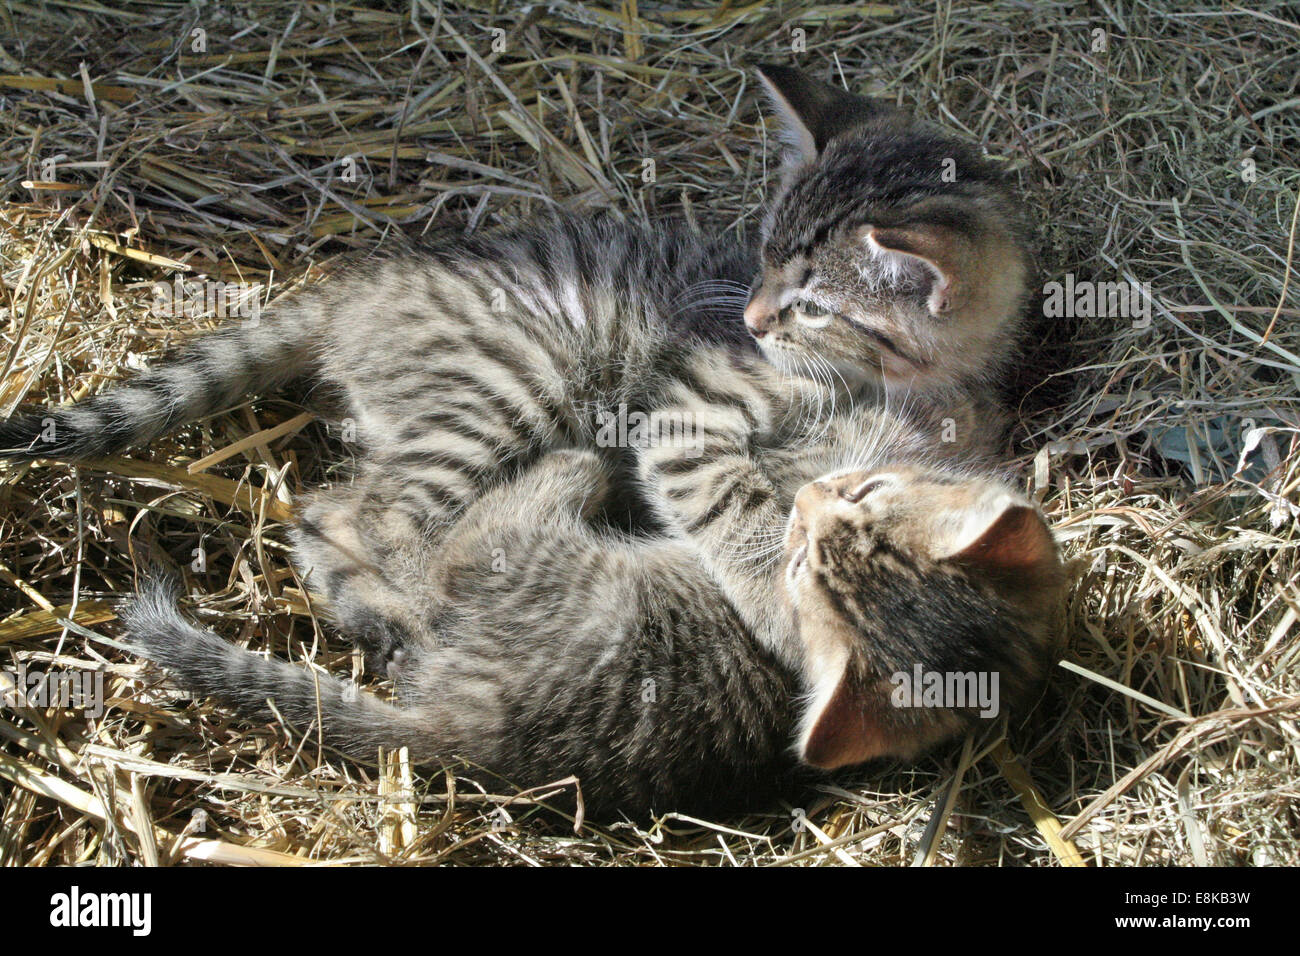 Two kittens sharing a cuddle in the straw. Stock Photo